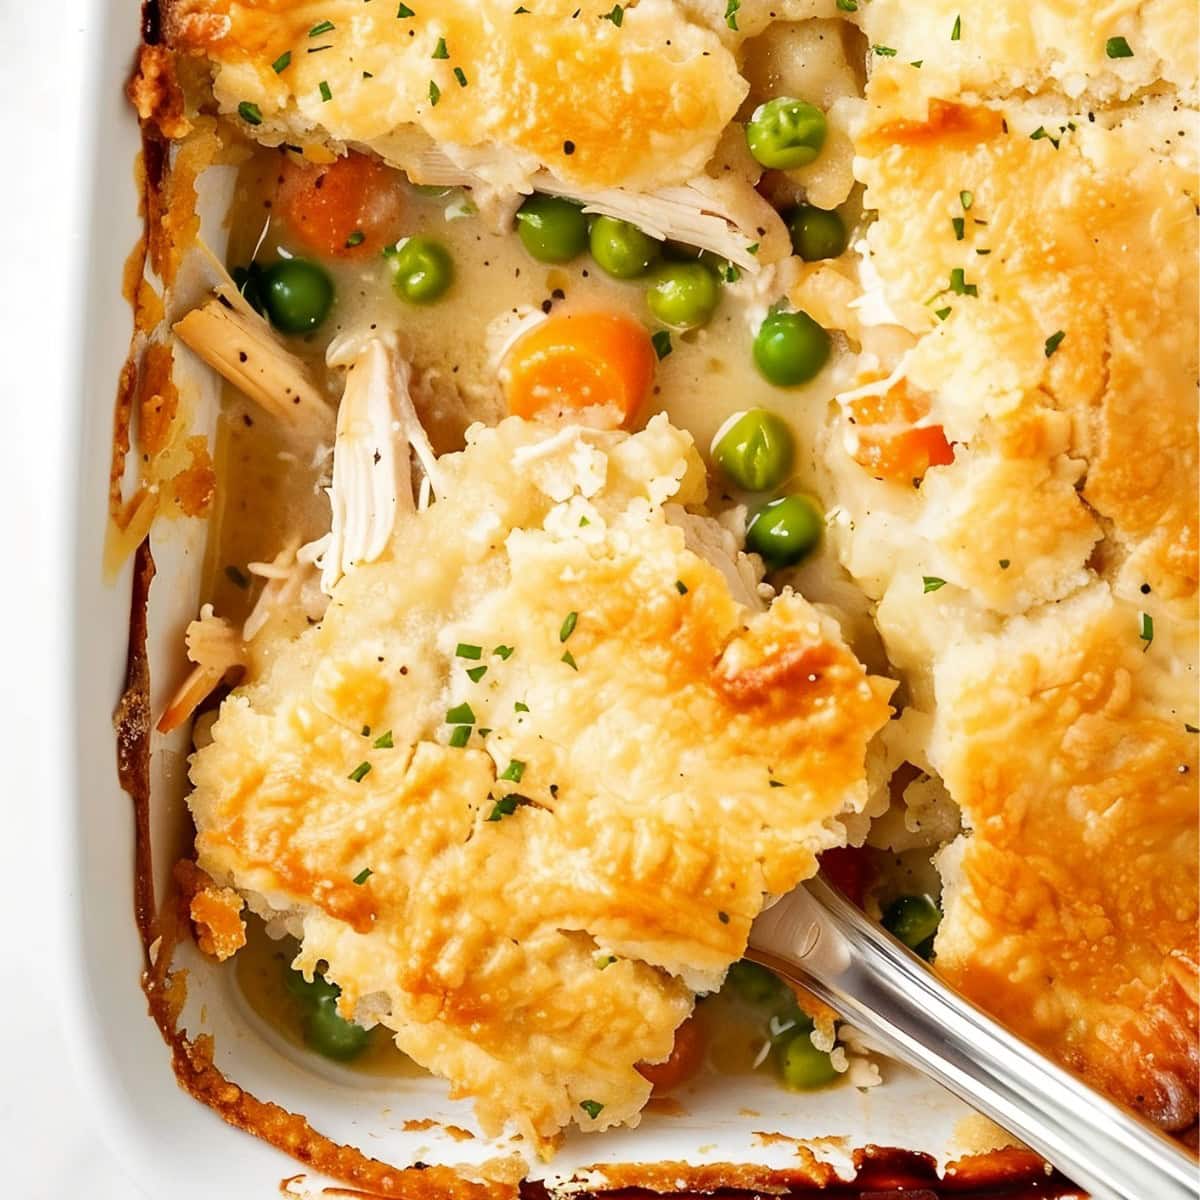 Close Top View of TikTok Chicken Cobbler- Shredded Chicken, Peas, Carrots, Sauce, and Flaky Biscuit Topping- in a Casserole Dish with a Serving Utensil